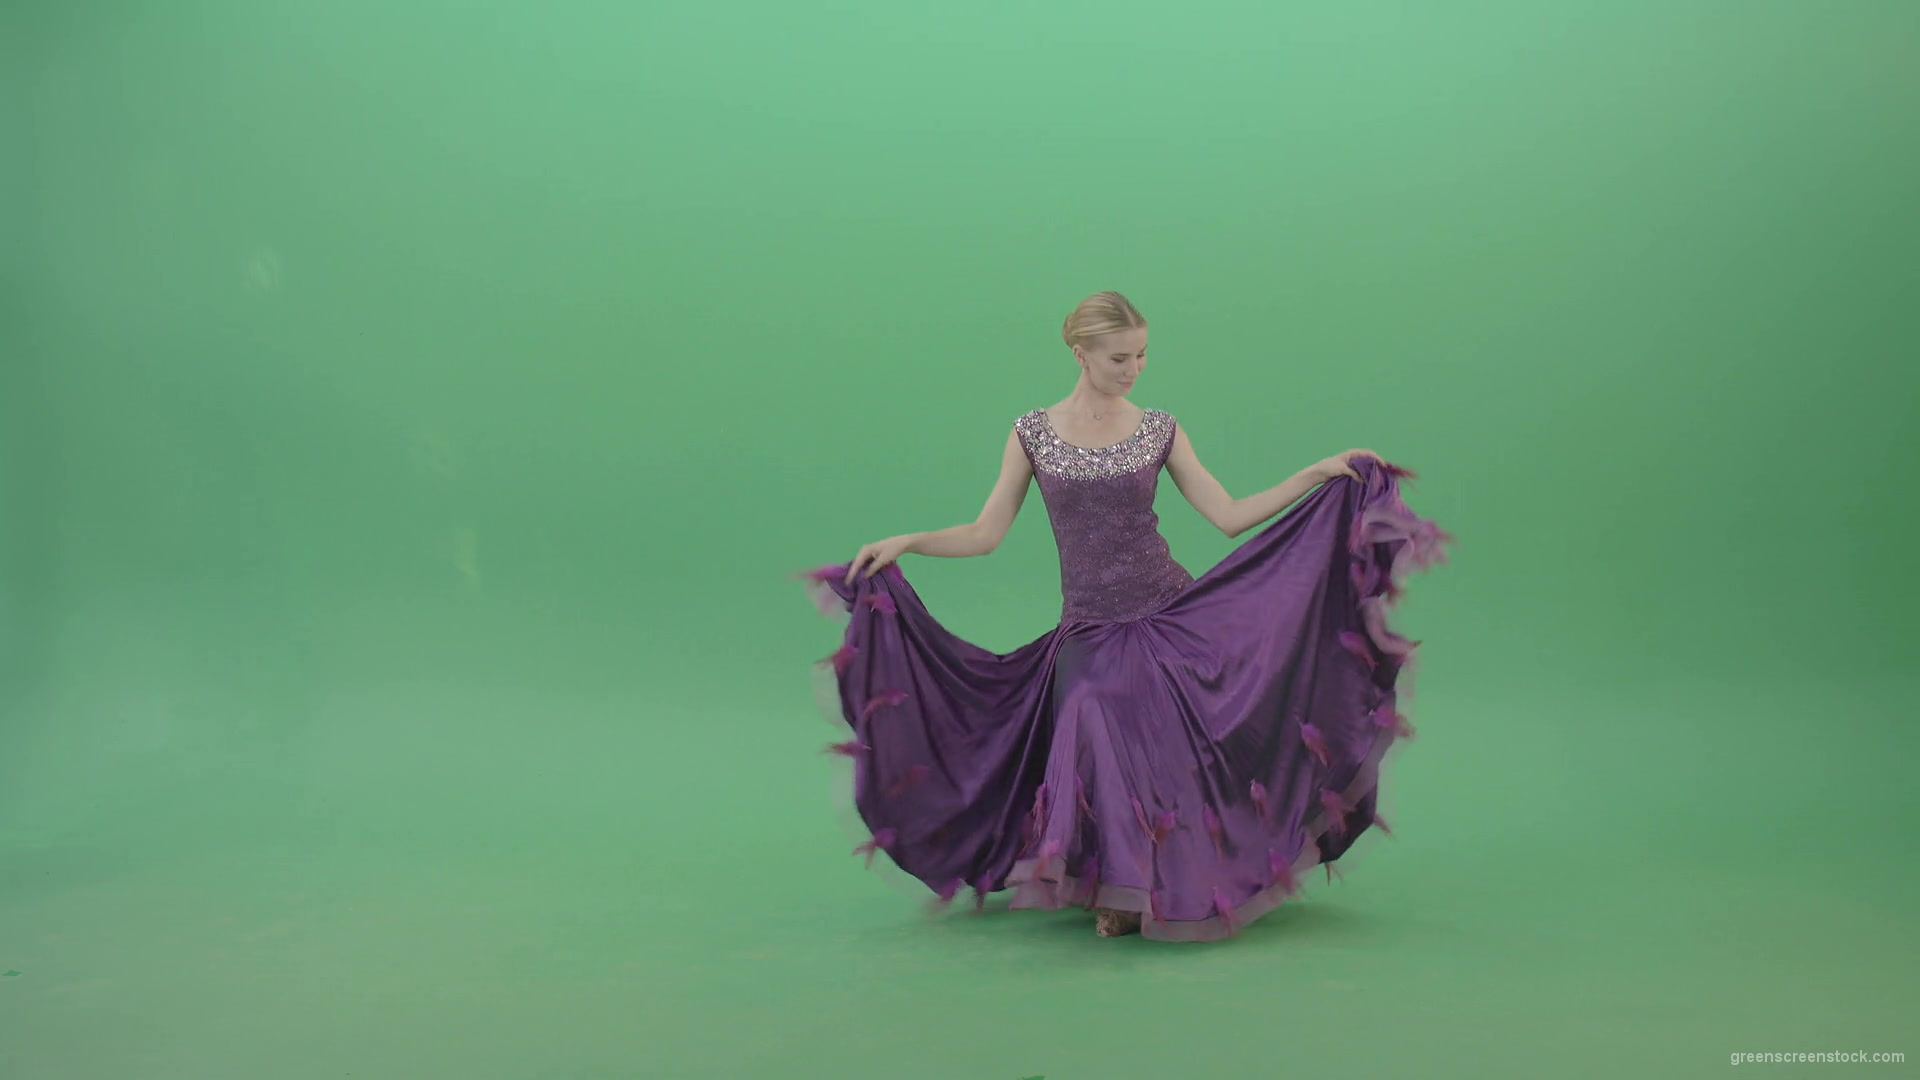 Royal-princess-girl-makes-reverence-and-spinning-in-violet-dress-on-green-screen-4K-Video-Footage-1-1920_008 Green Screen Stock